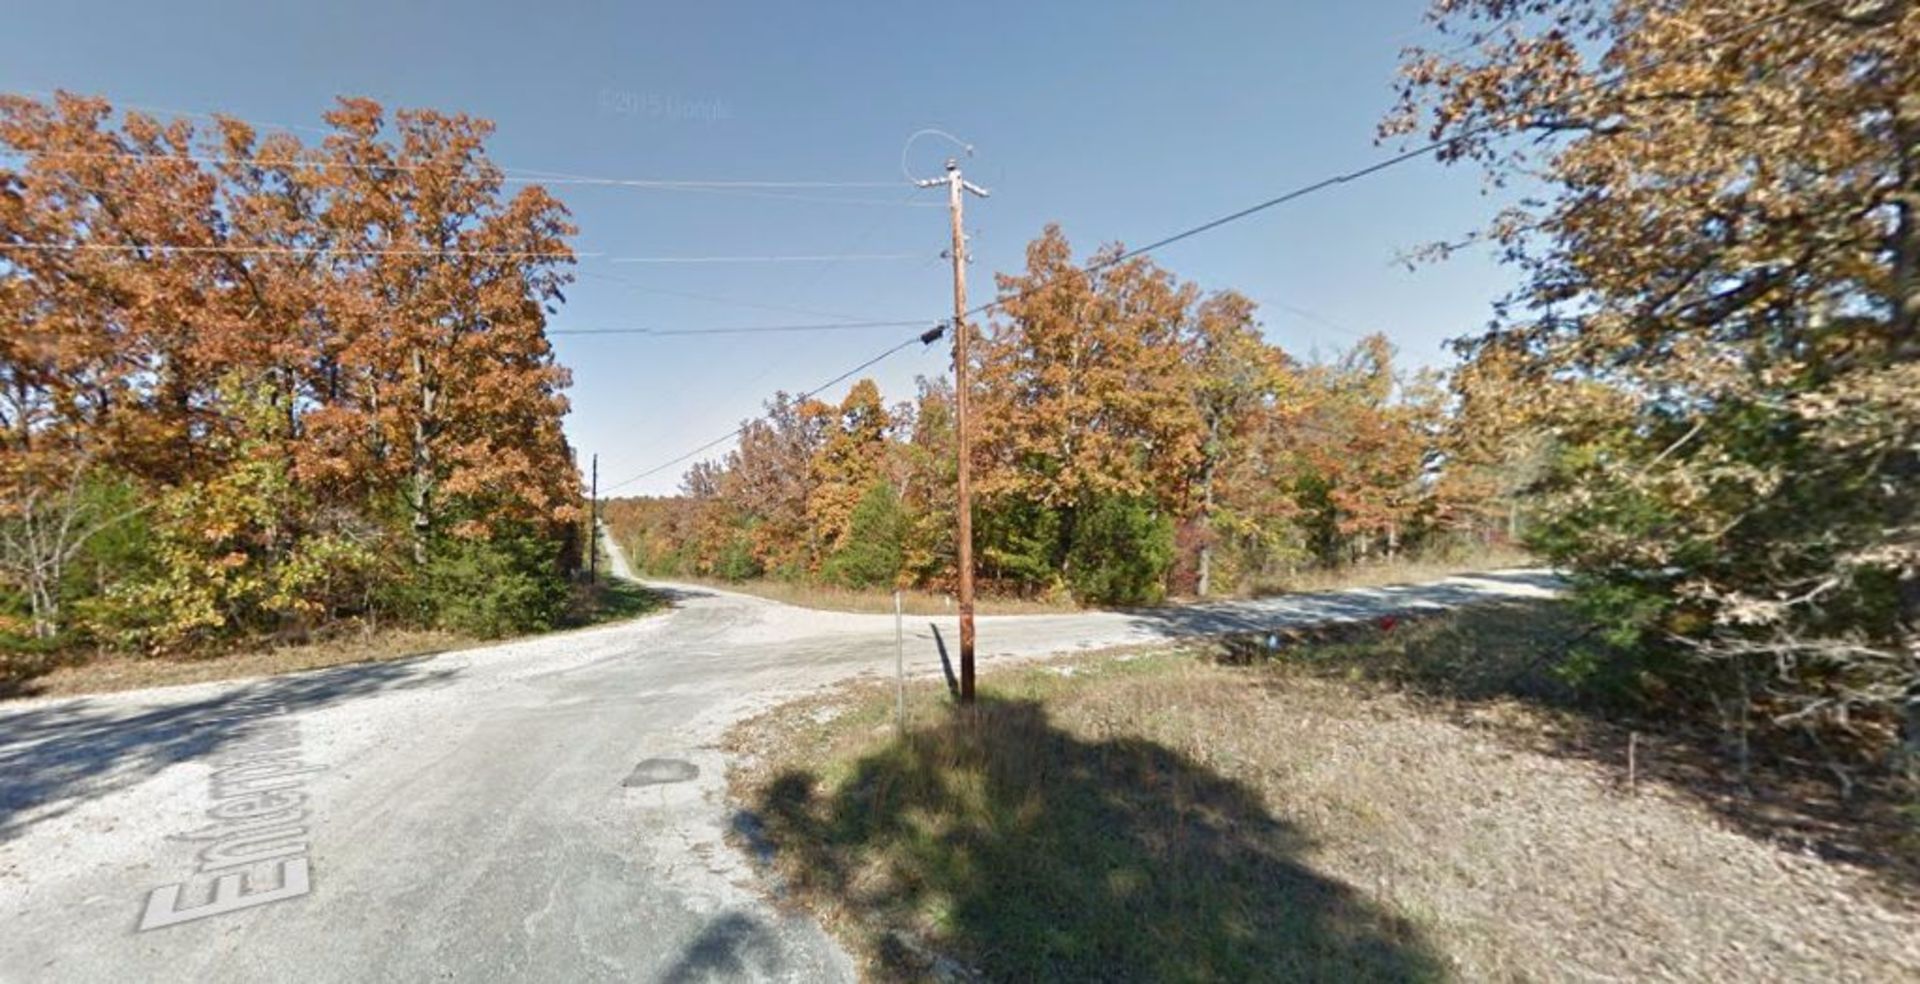 PLOT OF RESIDENTIAL BUILDING LAND, 0.453 ACRES IN HORSESHOE BEND, 72512, ARKANSAS, FORREST HEIGHTS - Image 7 of 17